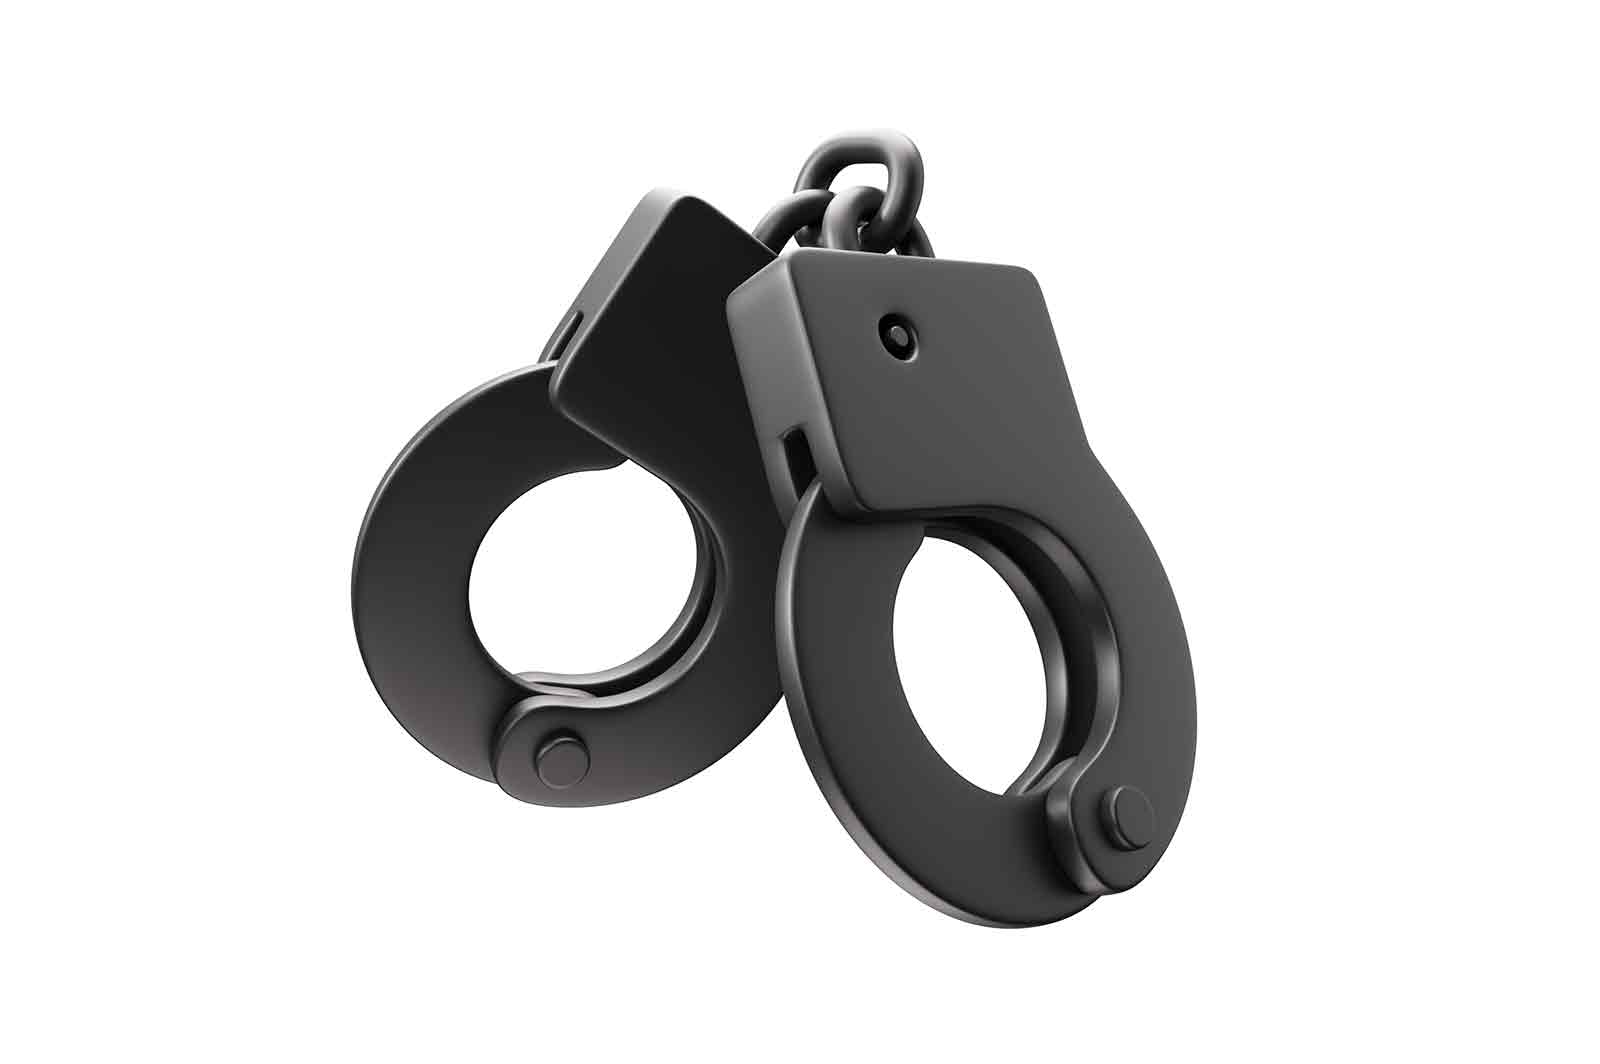 Police handcuffs icon, cybercrime and cyber security 3d rendered illustration. Pair of lockable linked metal rings